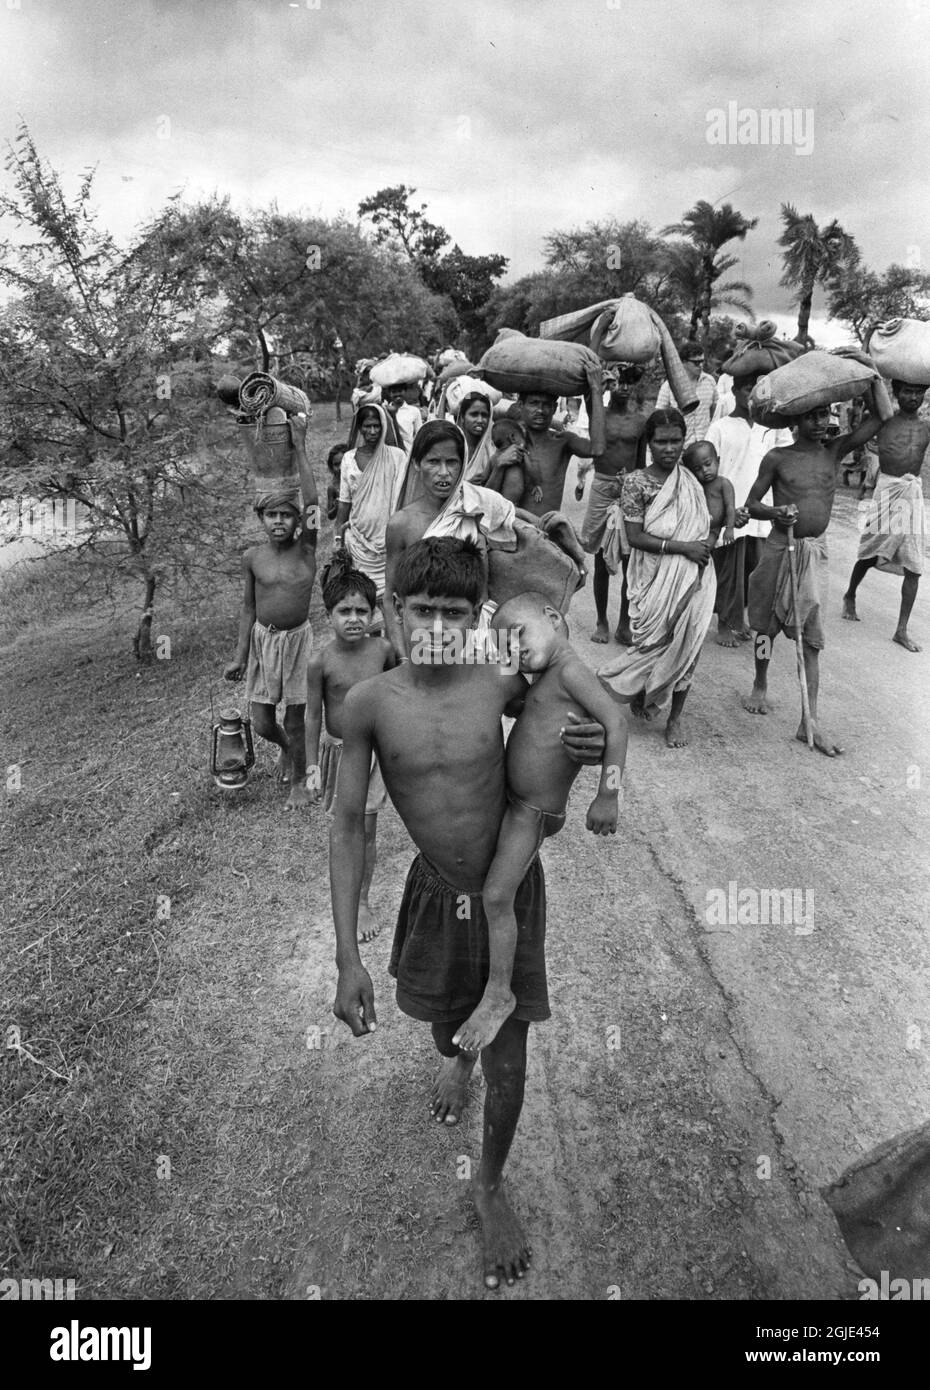 1971-06-24 The East Pakistani refugees only managed to bring a few belongings with them to India where their presence is creating growing religious tension. Photo: Leif Engberg / DN / TT / Code: 15  Stock Photo